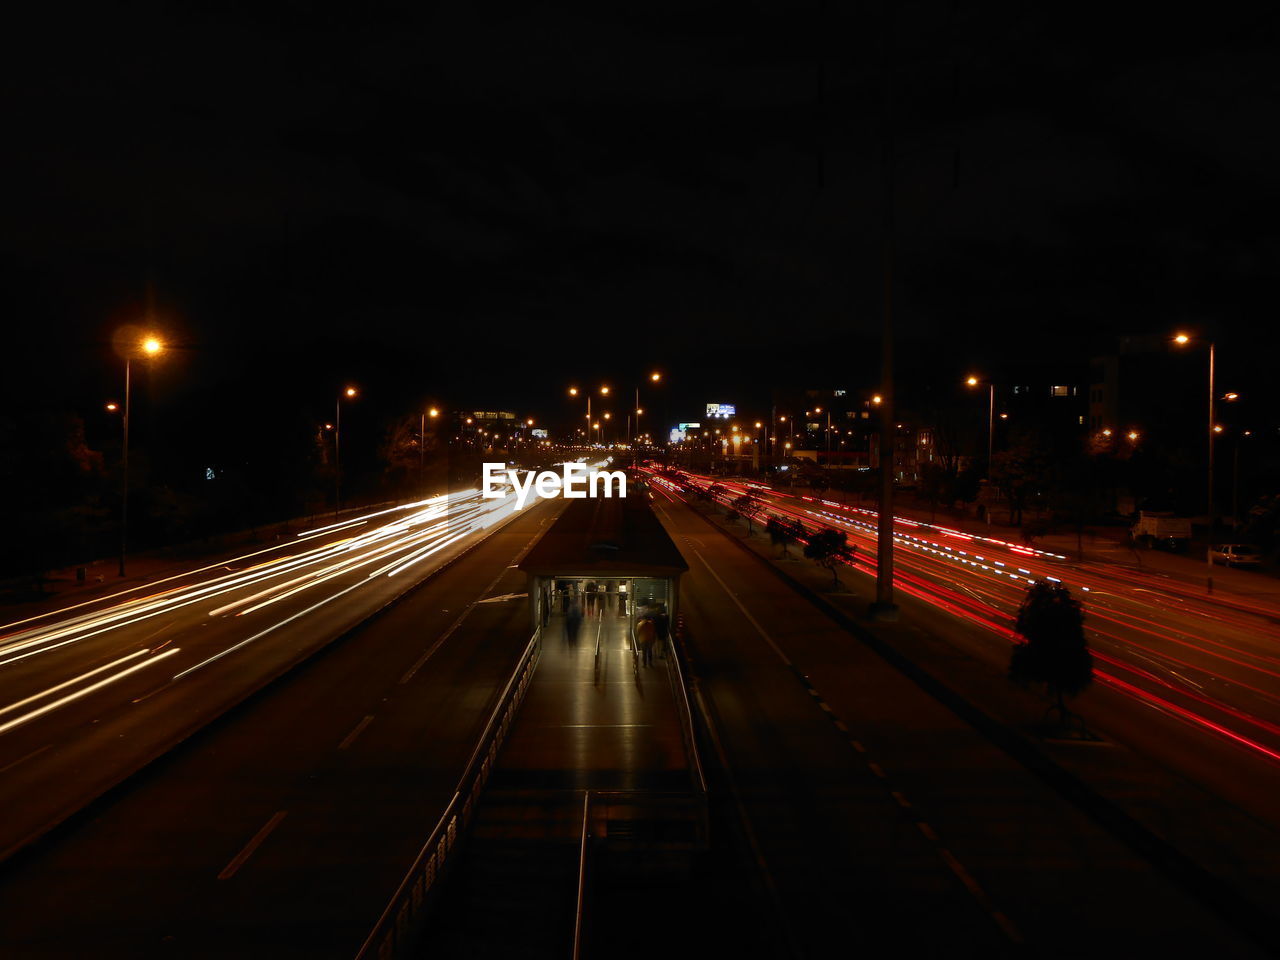 View of light trails at night